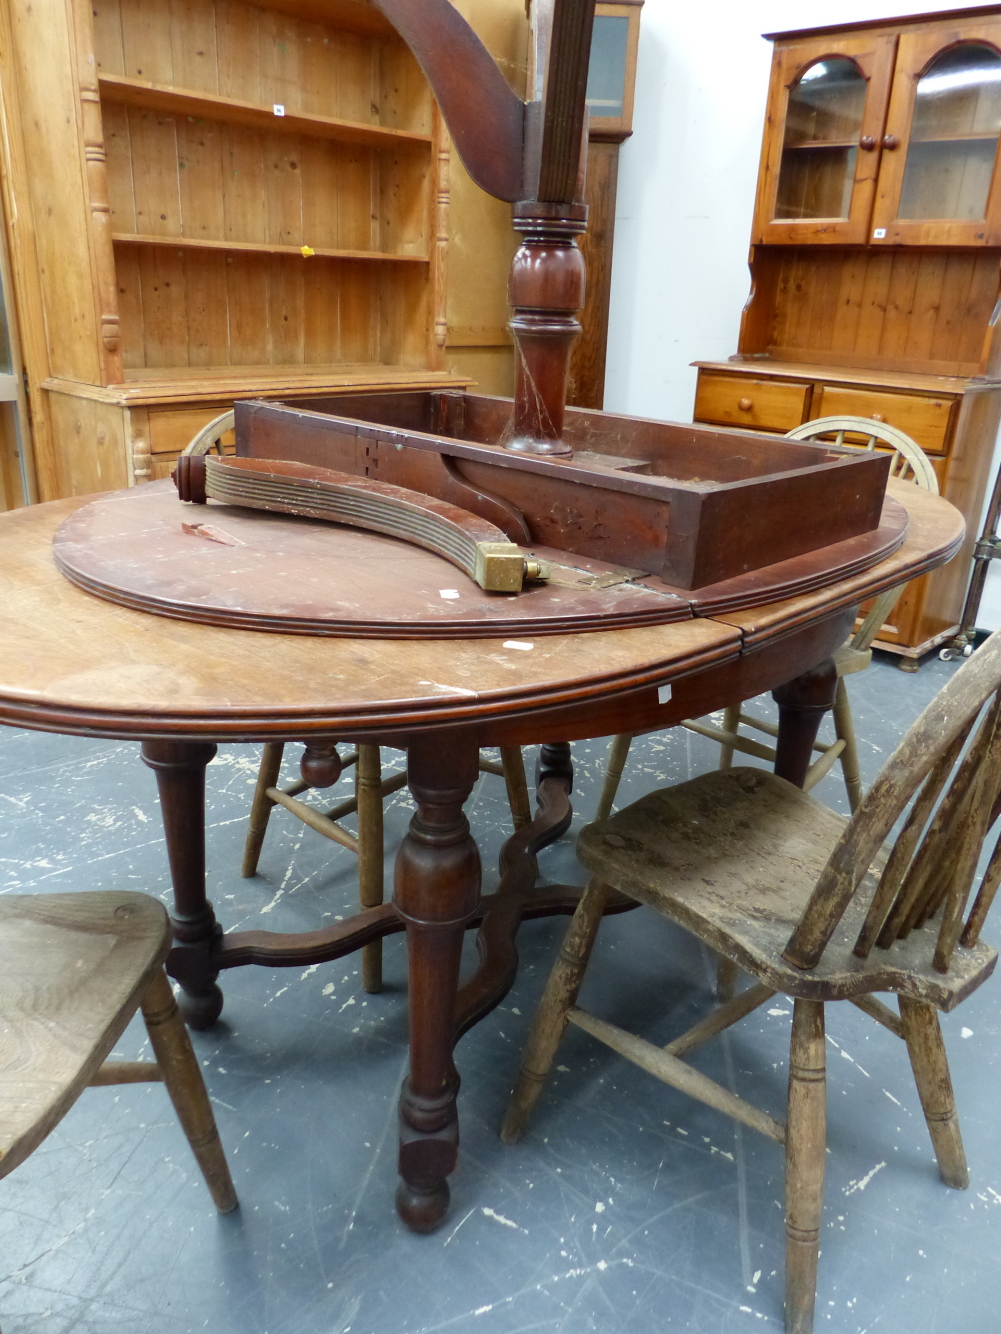 AN ANTIQUE FRENCH MAHOGANY DINING TABLE AND A DROP LEAF TABLE